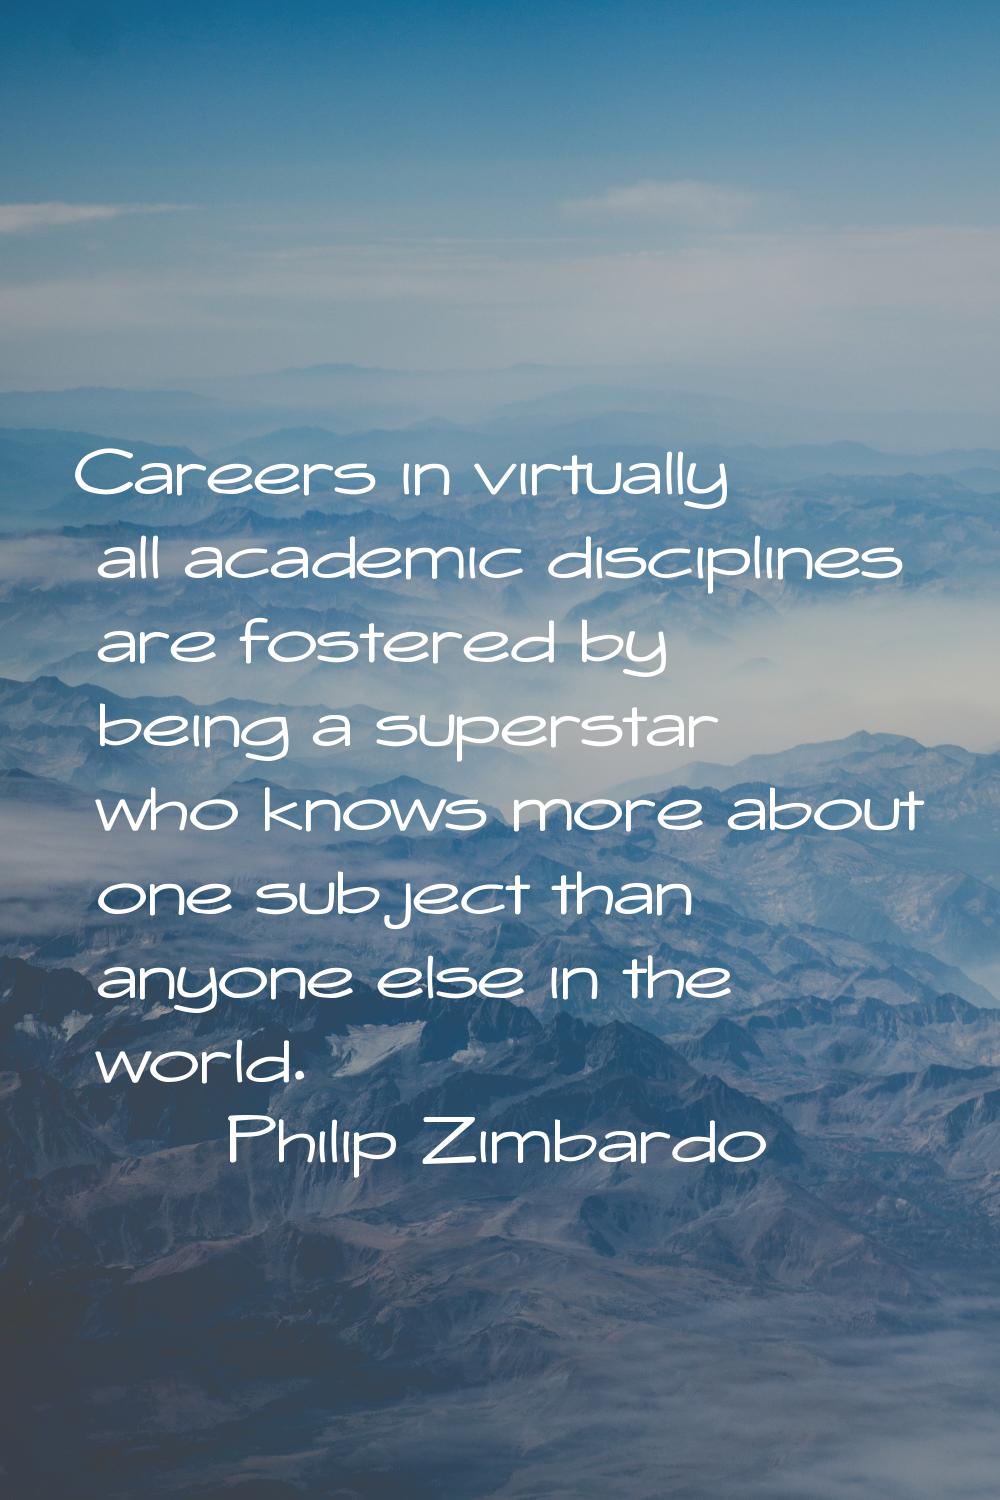 Careers in virtually all academic disciplines are fostered by being a superstar who knows more abou